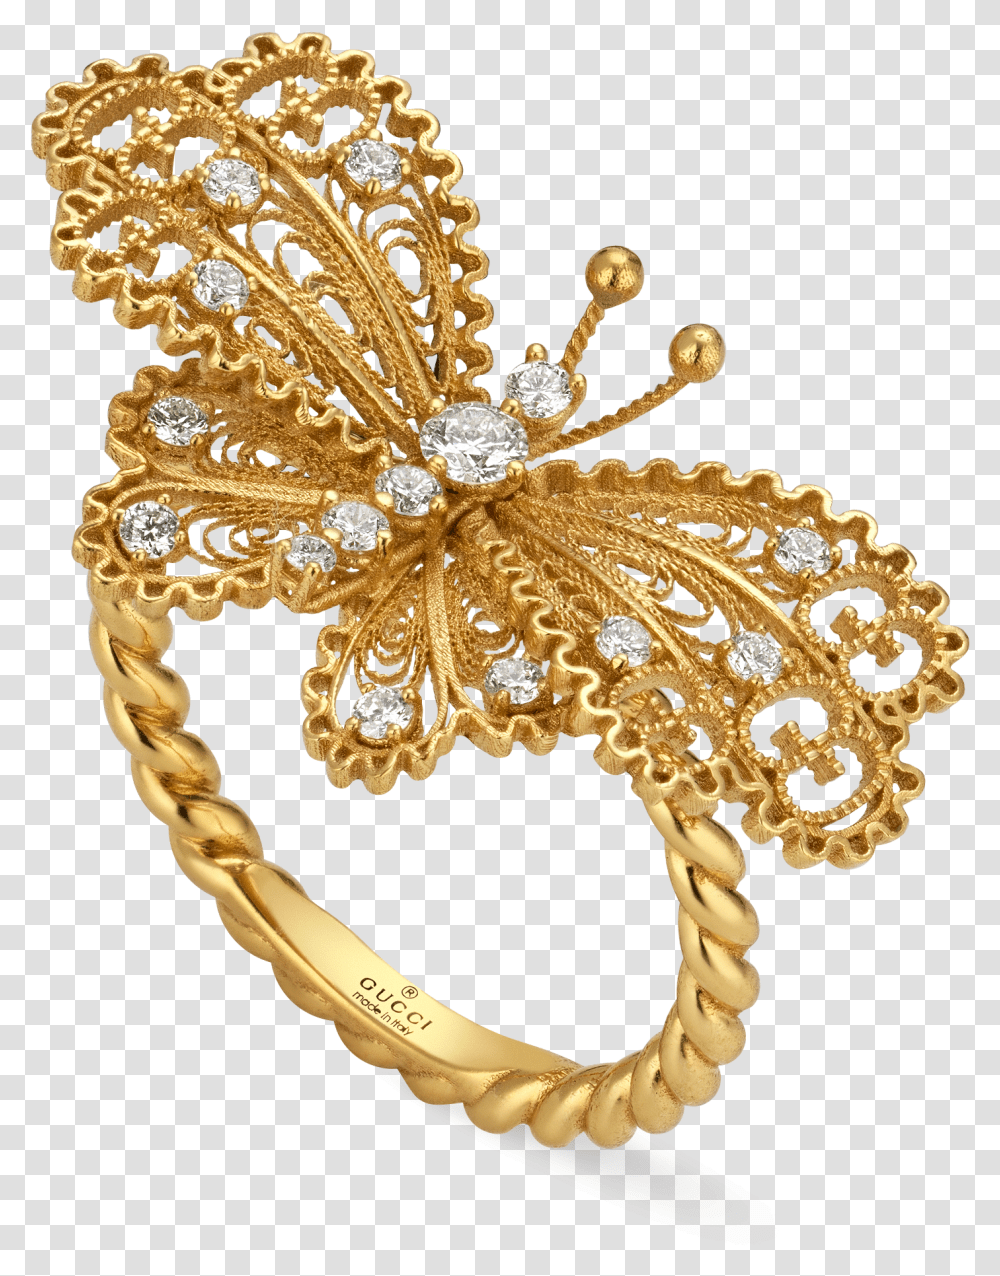 Gucci Le March Des Merveilles Diamond And Yellow Gold Brooch, Accessories, Accessory, Jewelry, Chandelier Transparent Png